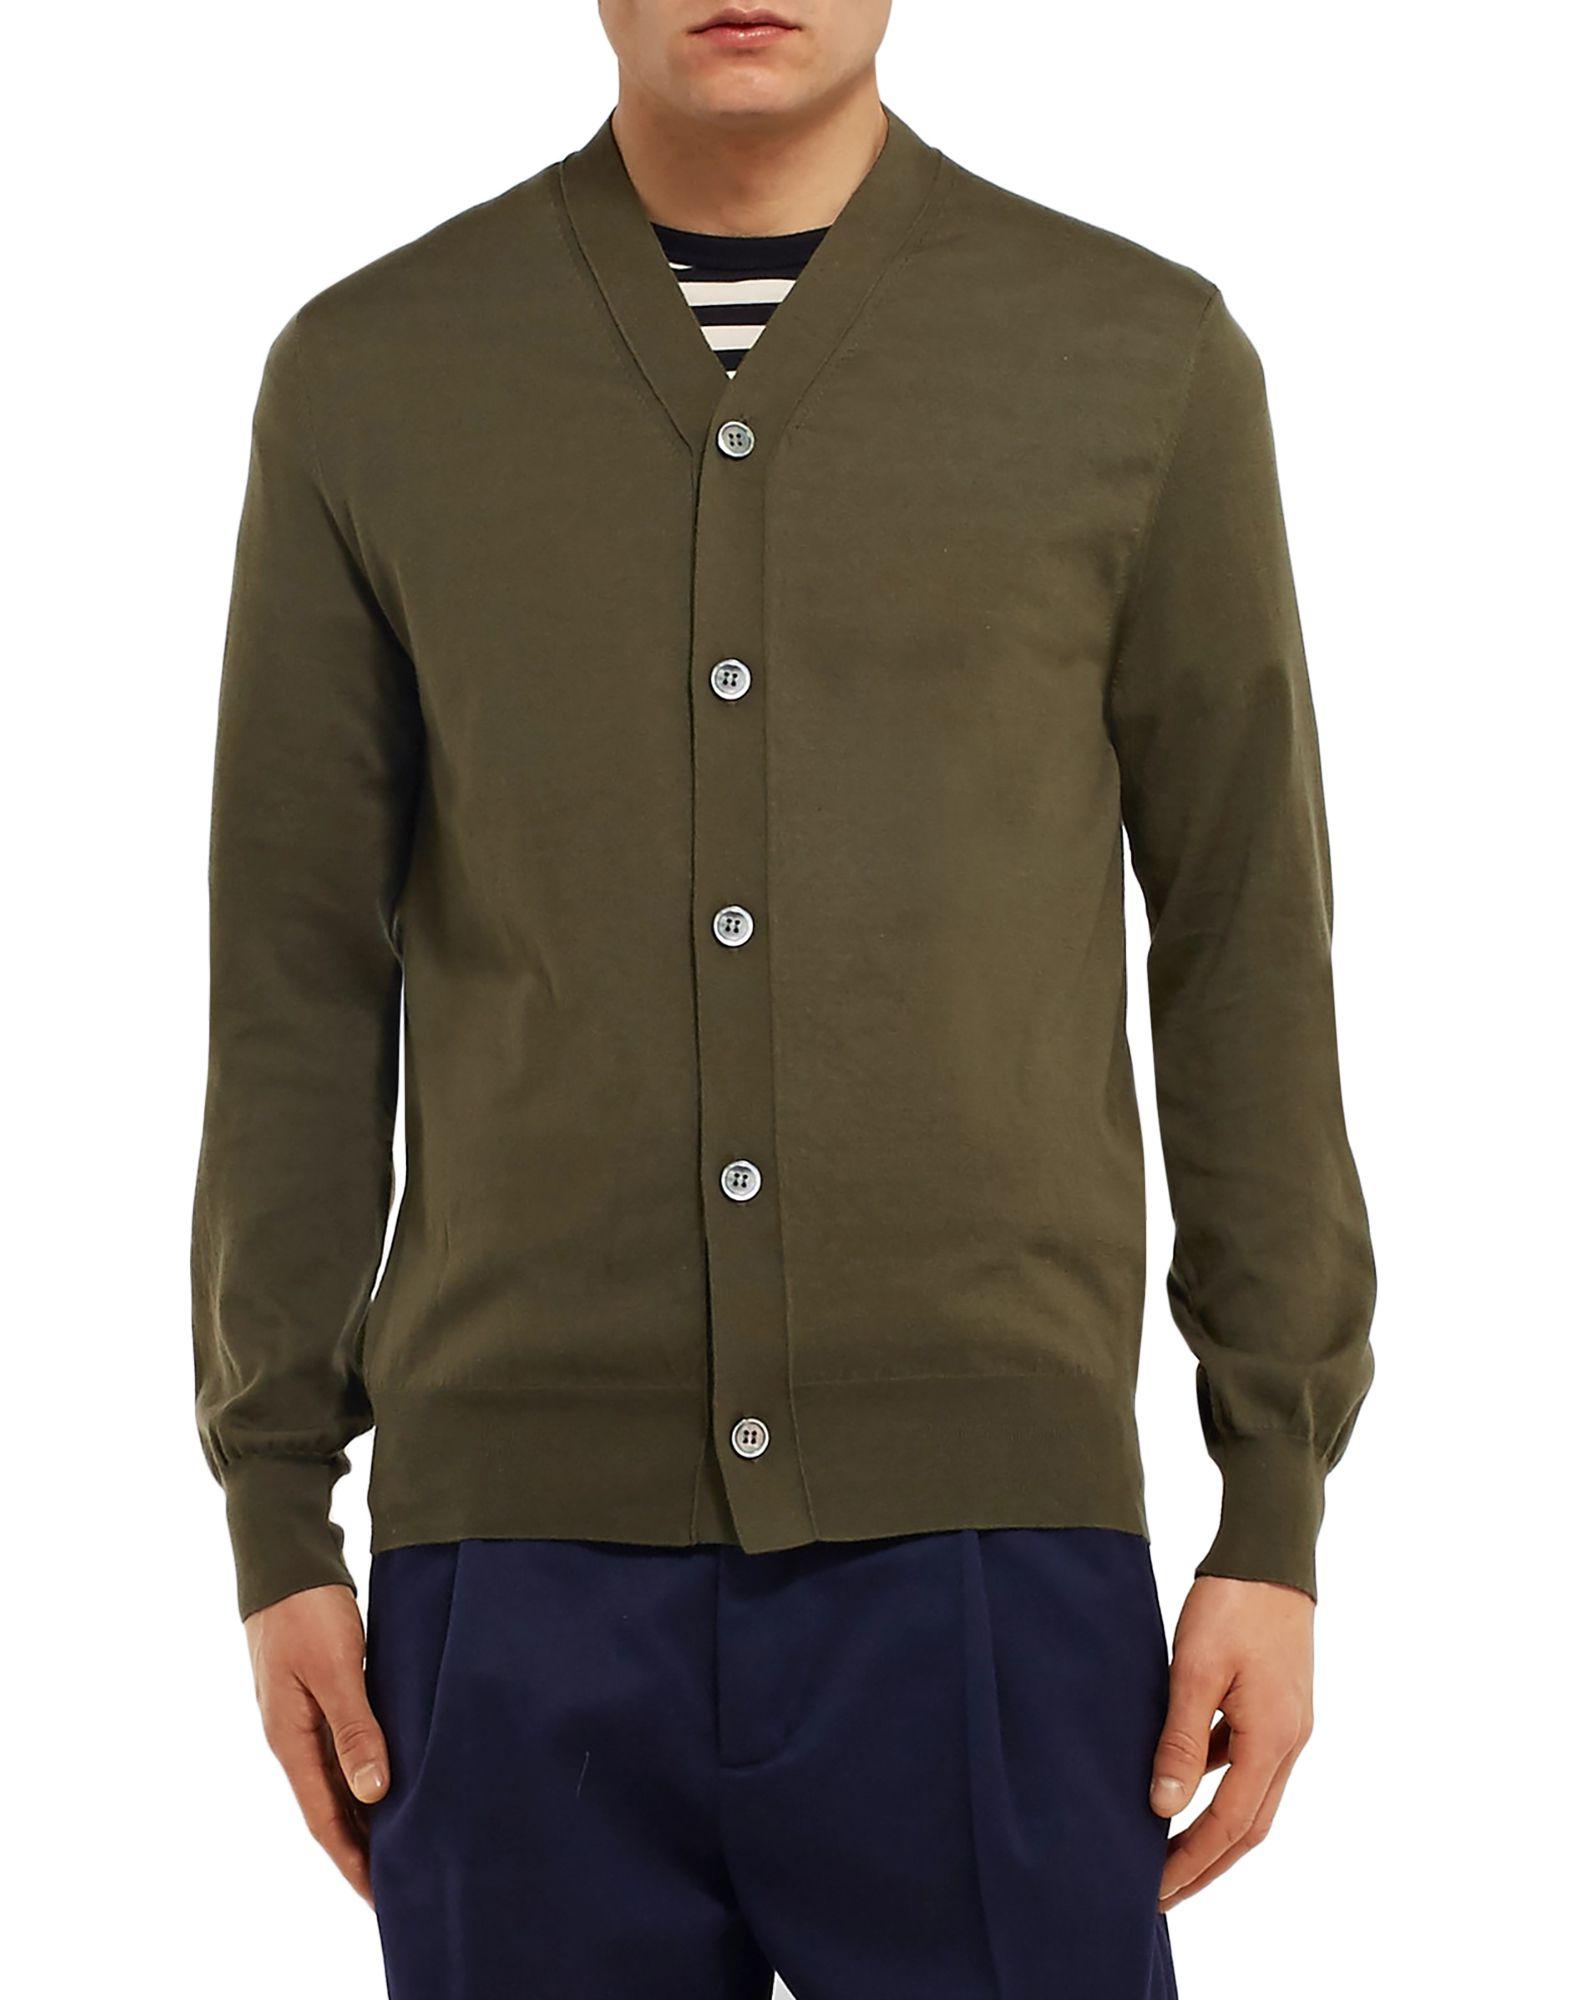 Comme des Garçons Cotton Cardigan in Military Green (Green) for Men - Lyst